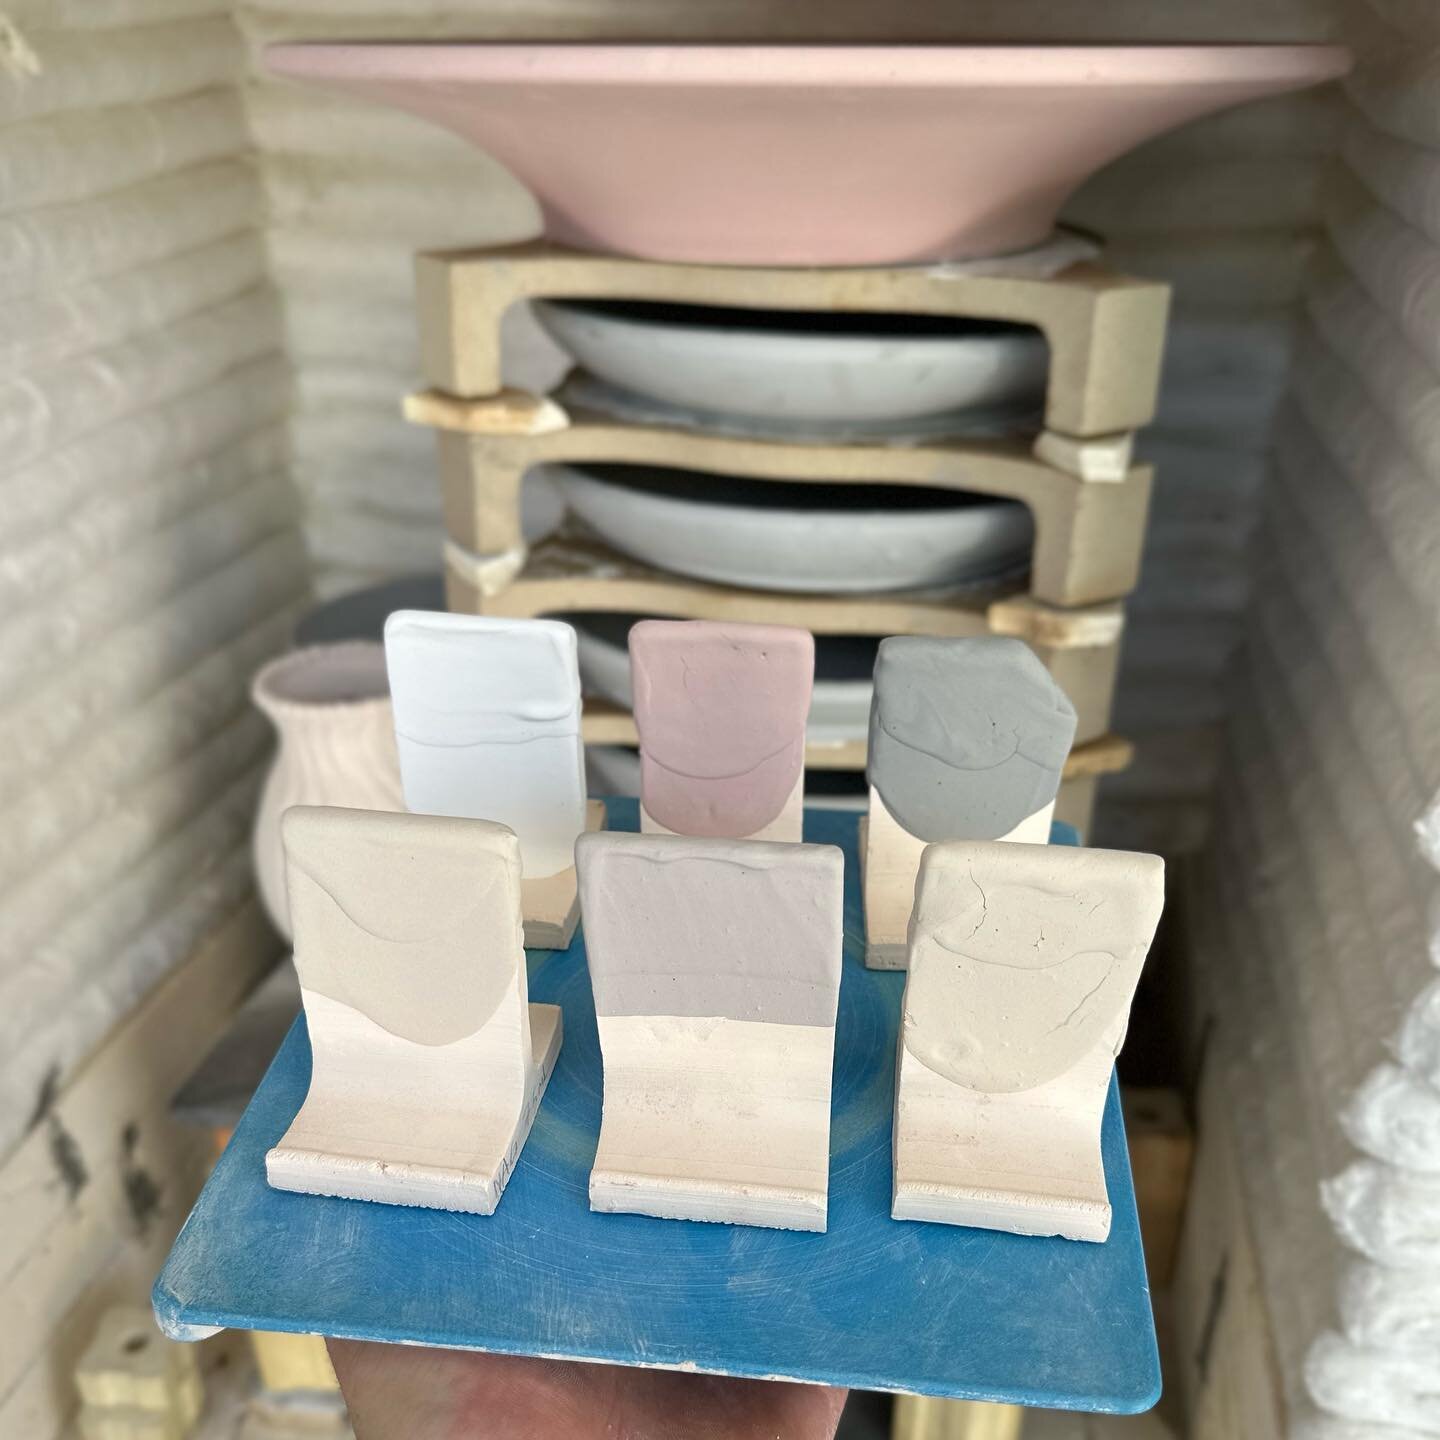 Today is the day🔥 I purchased this kiln a year ago and I was hoping to start using it right away. The idea was to have a small gas kiln that I could test out glazes on a regular basis, without having to load the big kiln every time. This kiln runs o